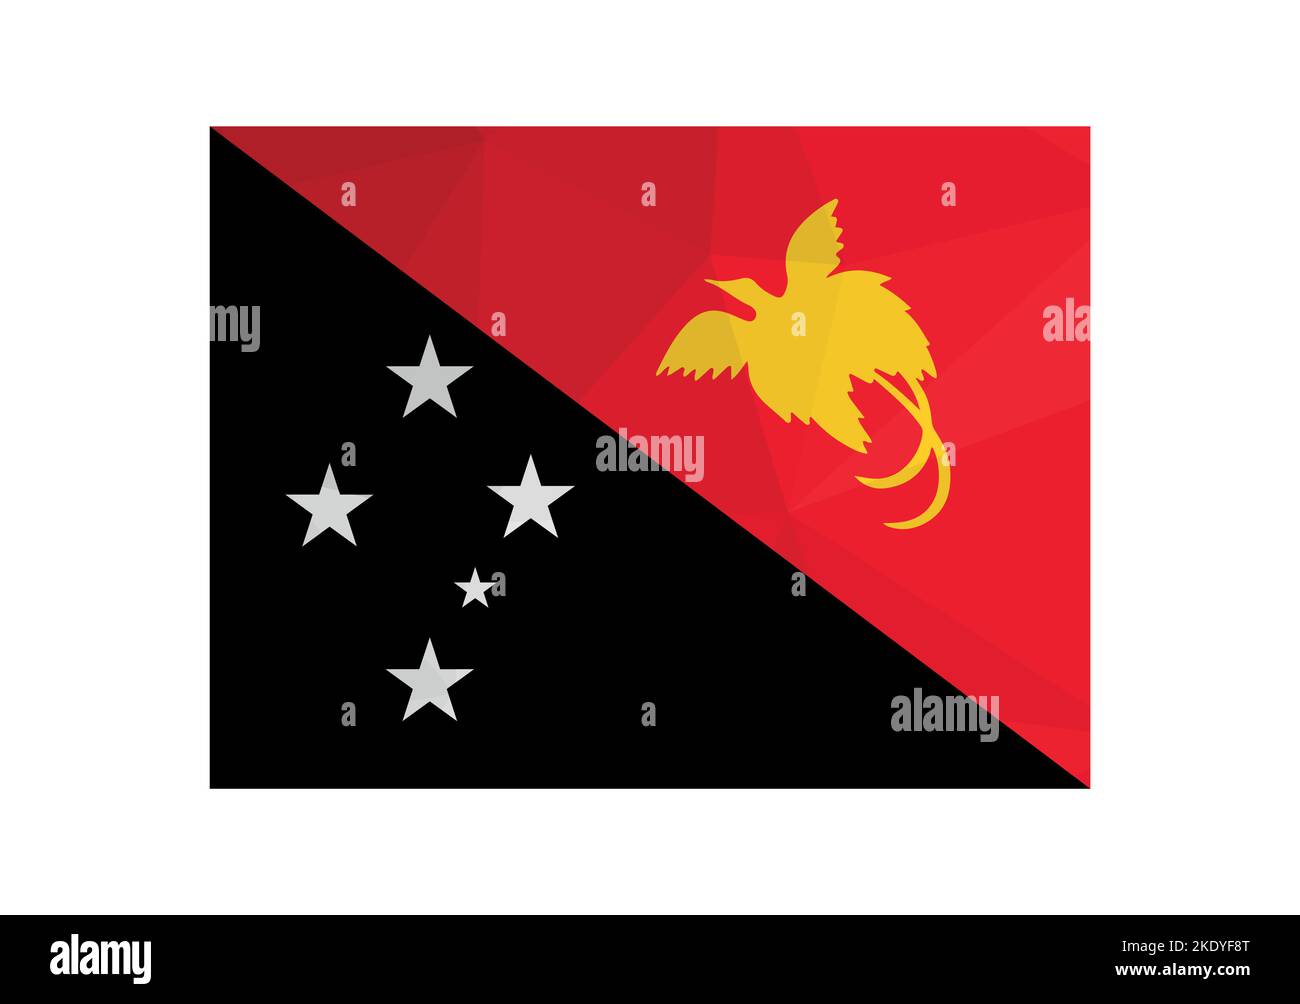 Vector illustration. Official ensign of Papua New Guinea. National flag in red, black colors, yellow bird, white stars. Creative design in low poly st Stock Vector